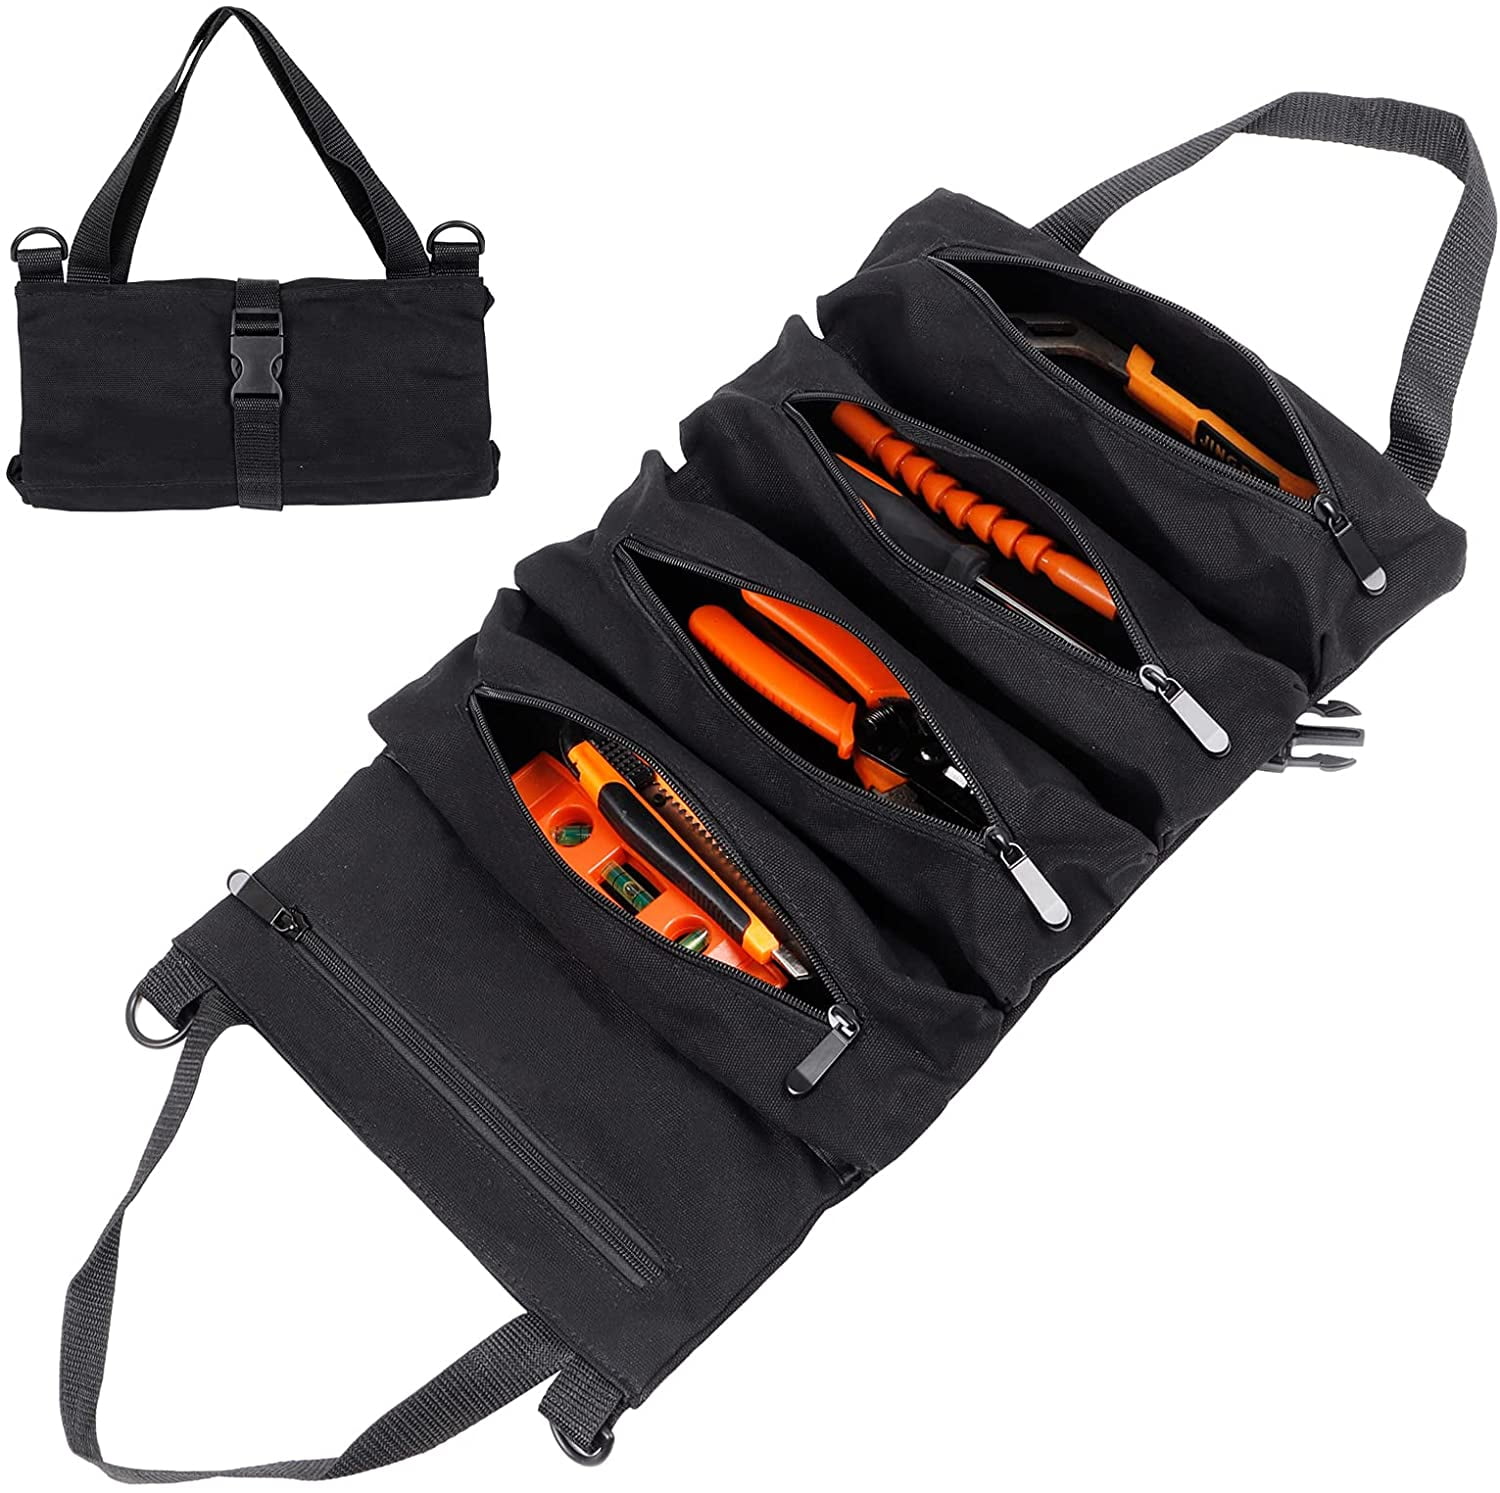 Looking for a good compact tool bag to carry basic/essential tools | Tacoma  World